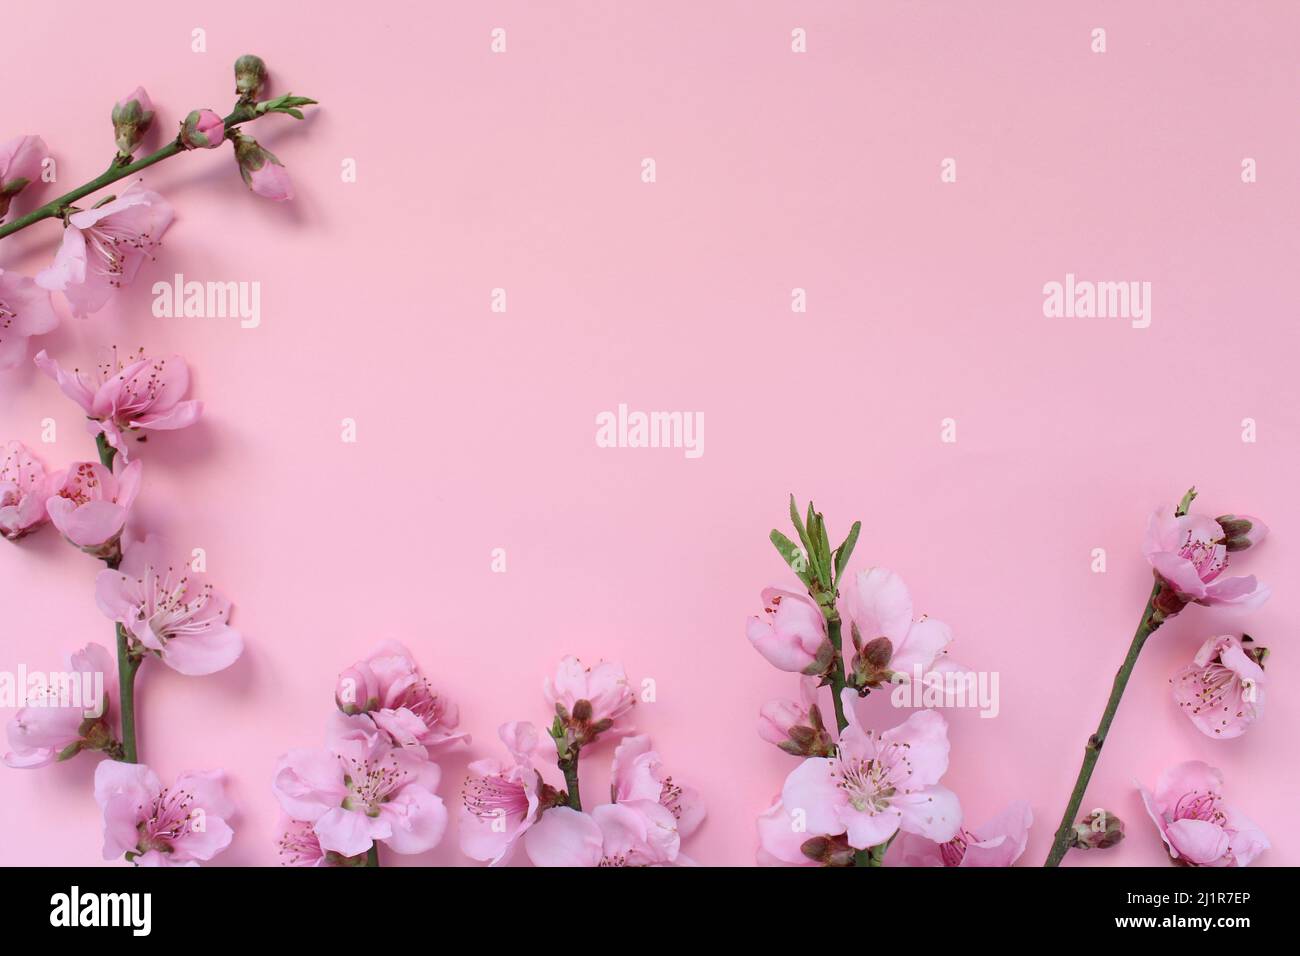 Spring concept idea. Blossom tree branches isolated on pink background. Top view on pink nectarine flower formed like frame with space for text. Stock Photo